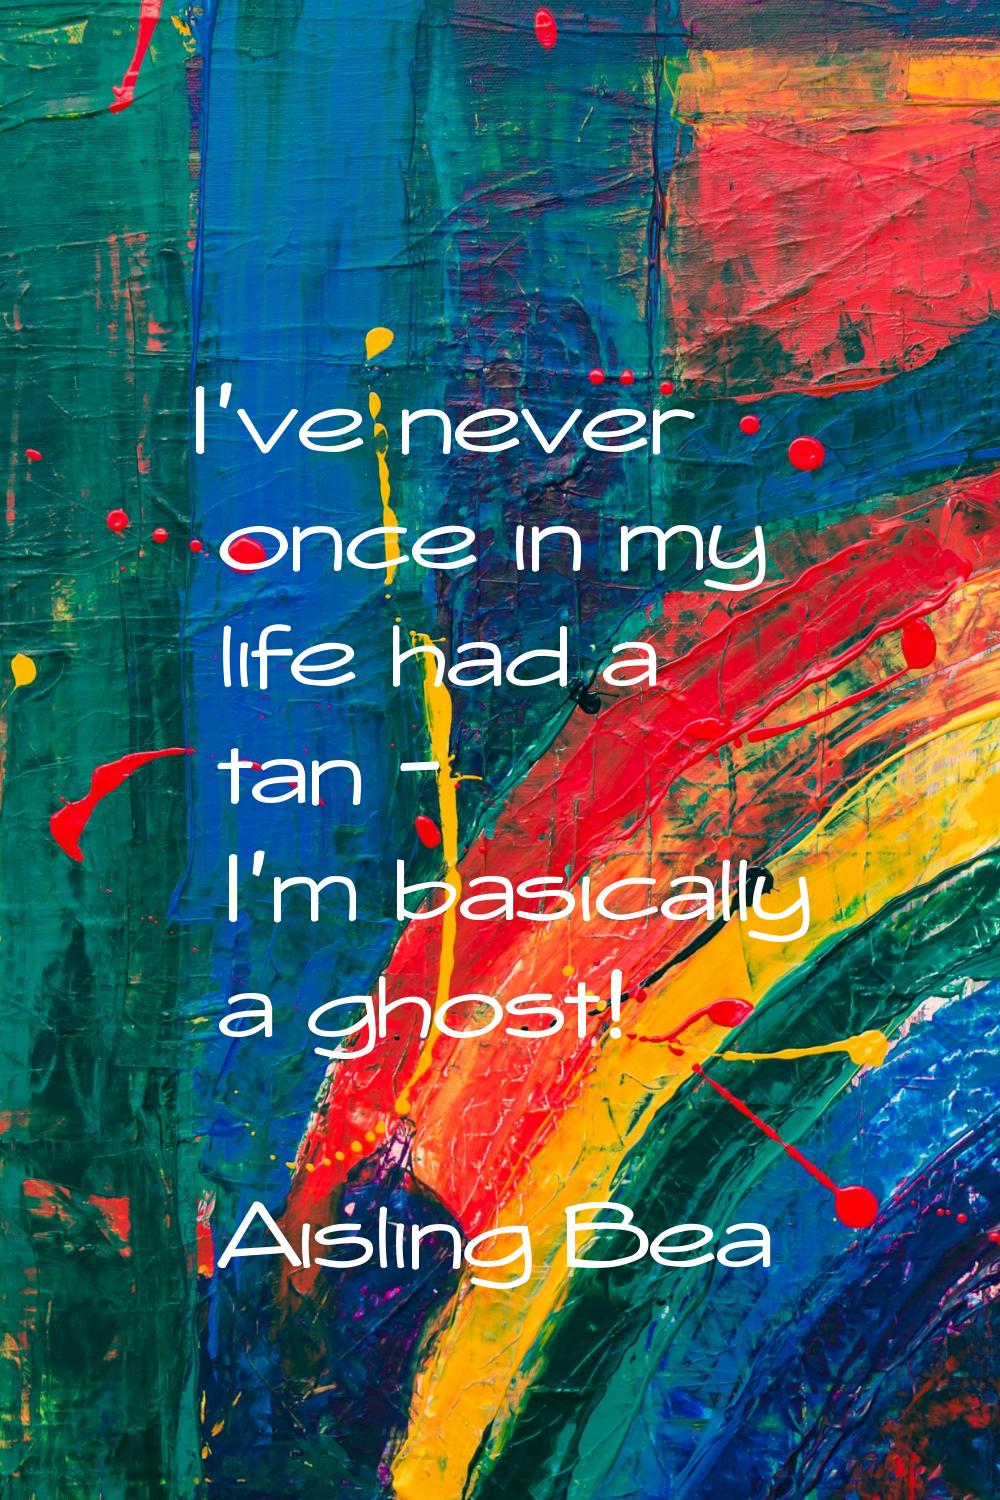 I've never once in my life had a tan - I'm basically a ghost!